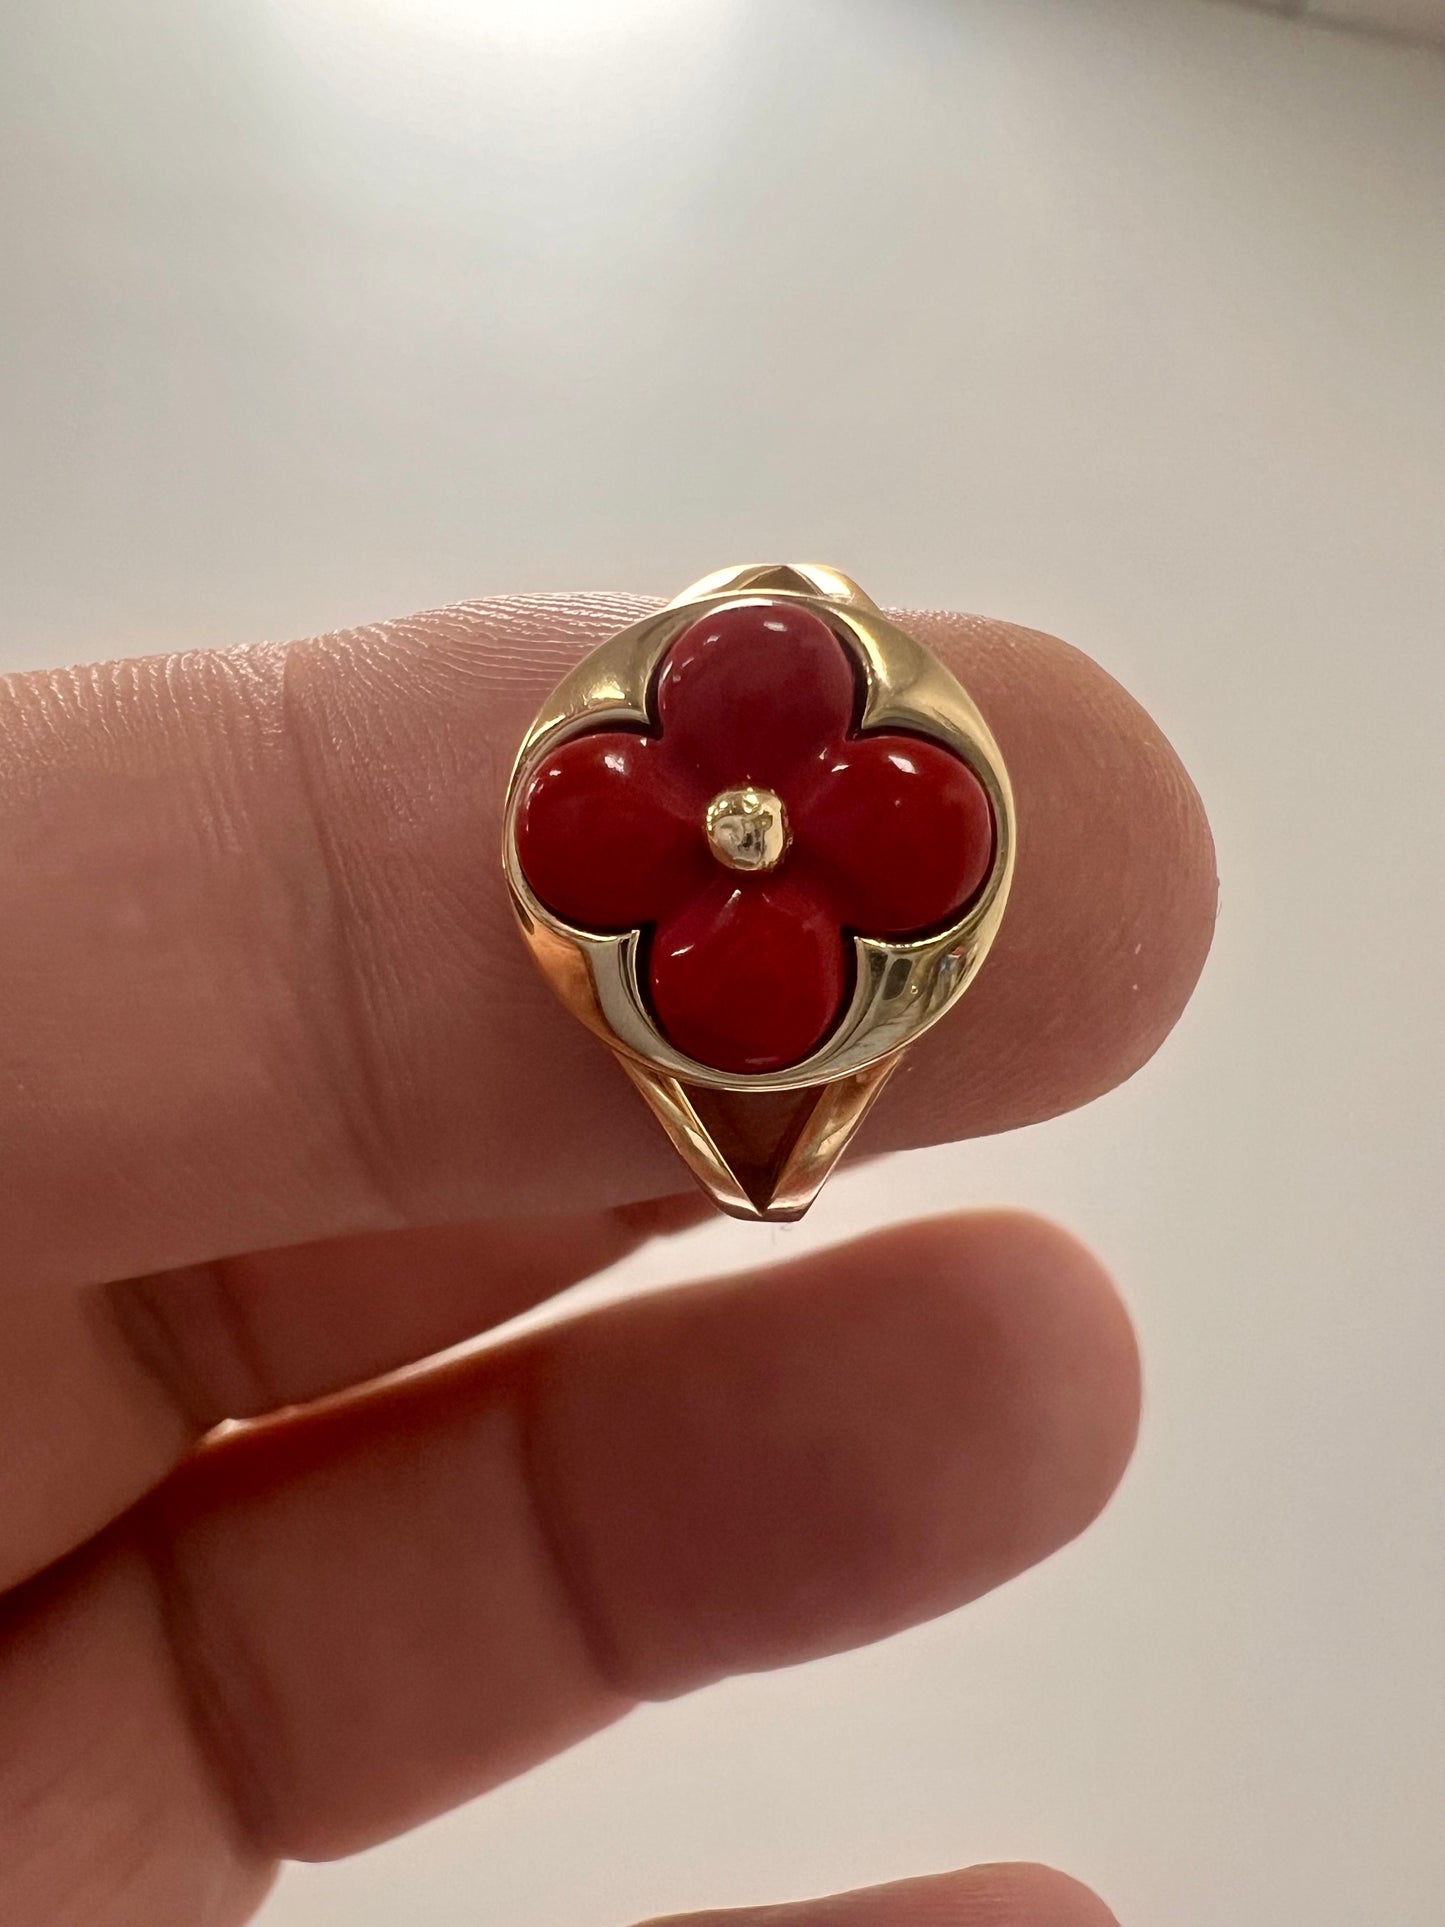 14K Yellow gold red carnelian clover ring-226734